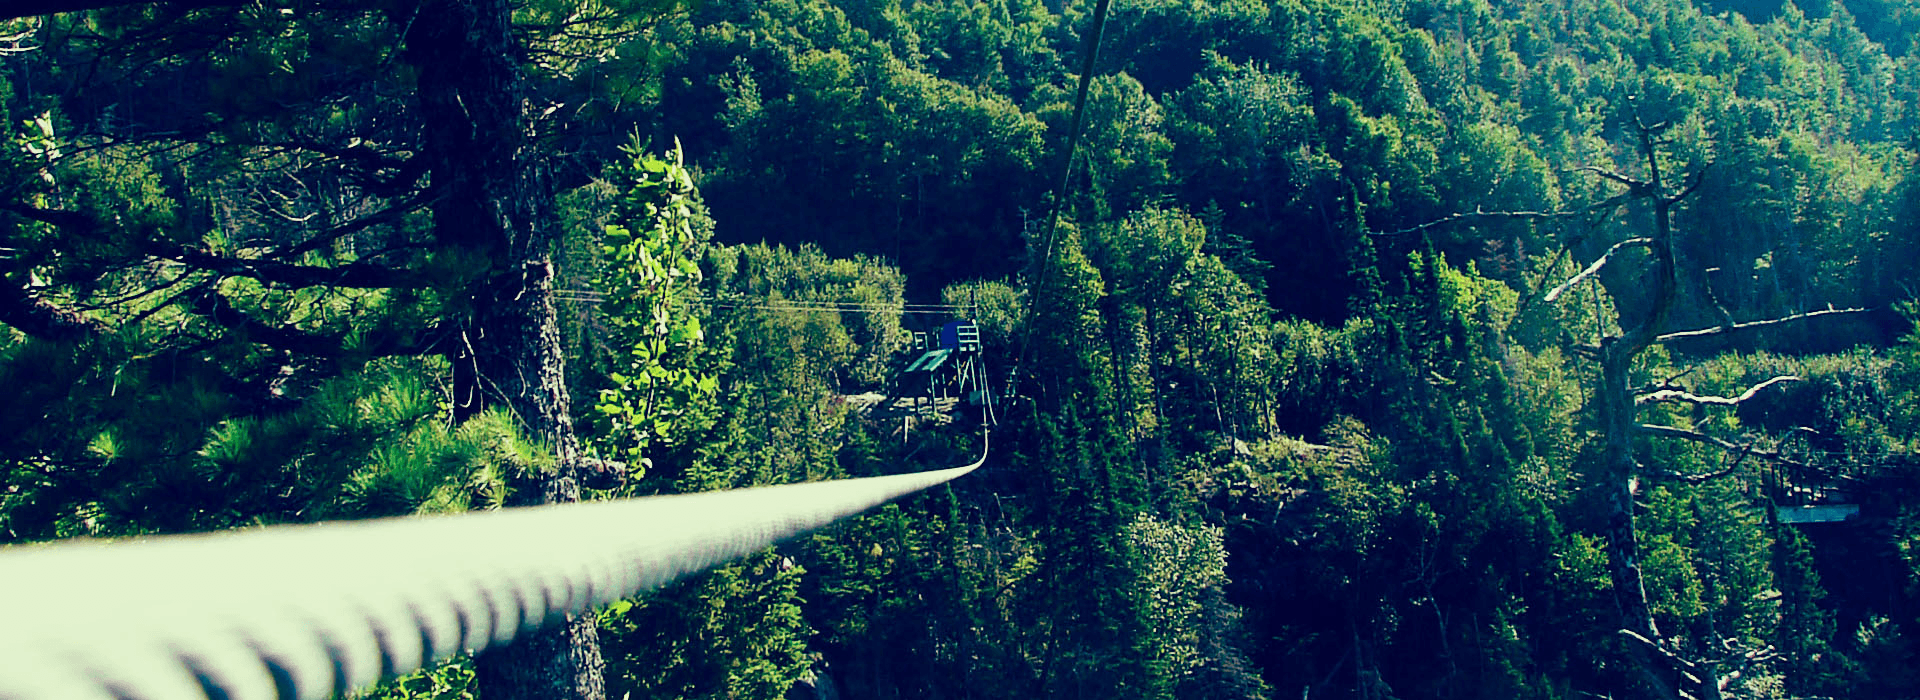 tree top adventures in the mountains header